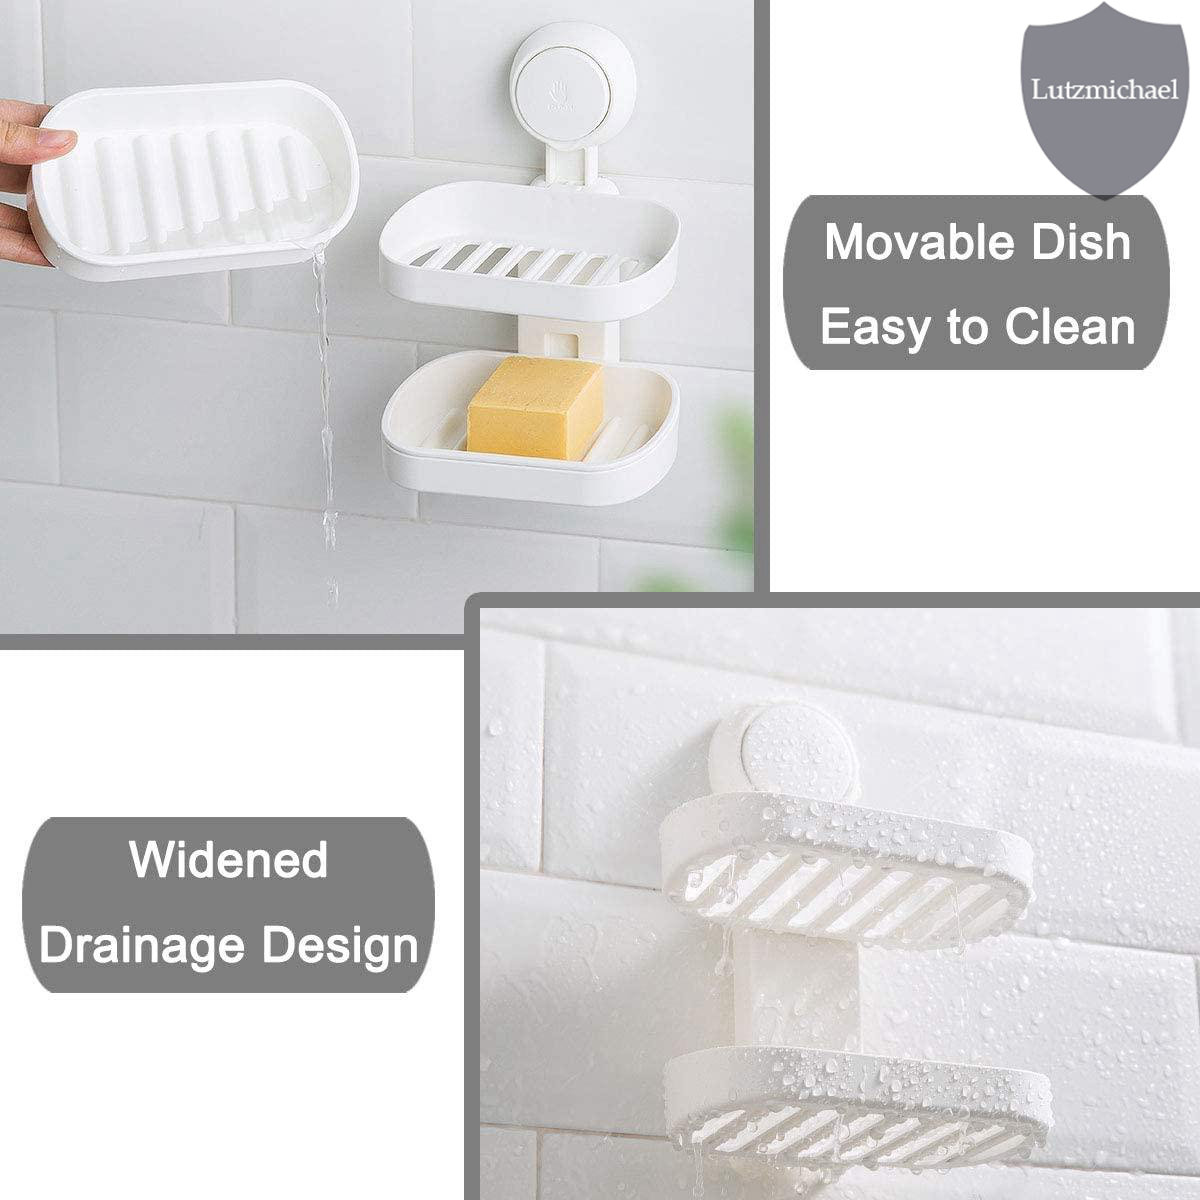 Rebrilliant Soap Dish, Bathroom Soap Dishes Soap Holder Soap Tray with  Holes to Drain Water- Oval Shape Soap Dish for Shower Bathroom Kitchen  Counter Top